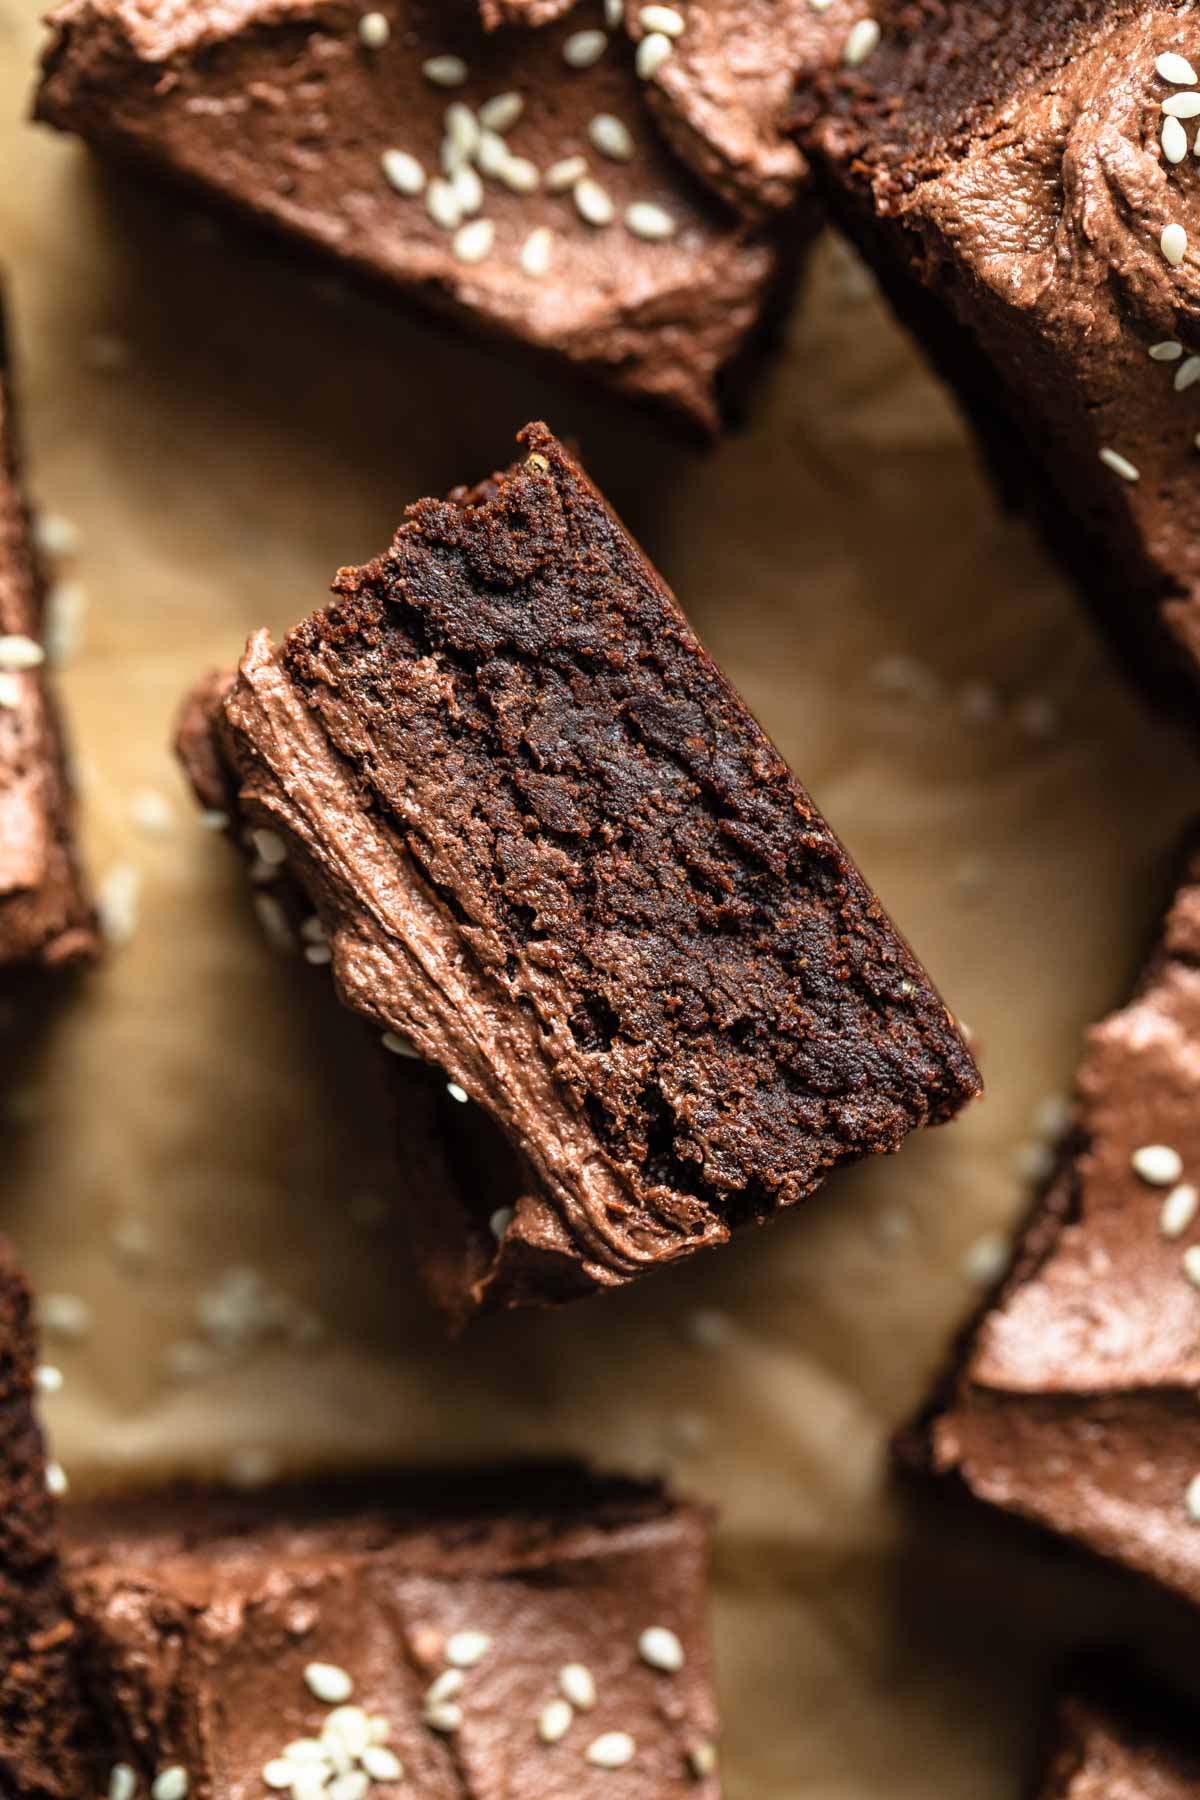 Up close view of a brownie on its side showing the fudgy texture.